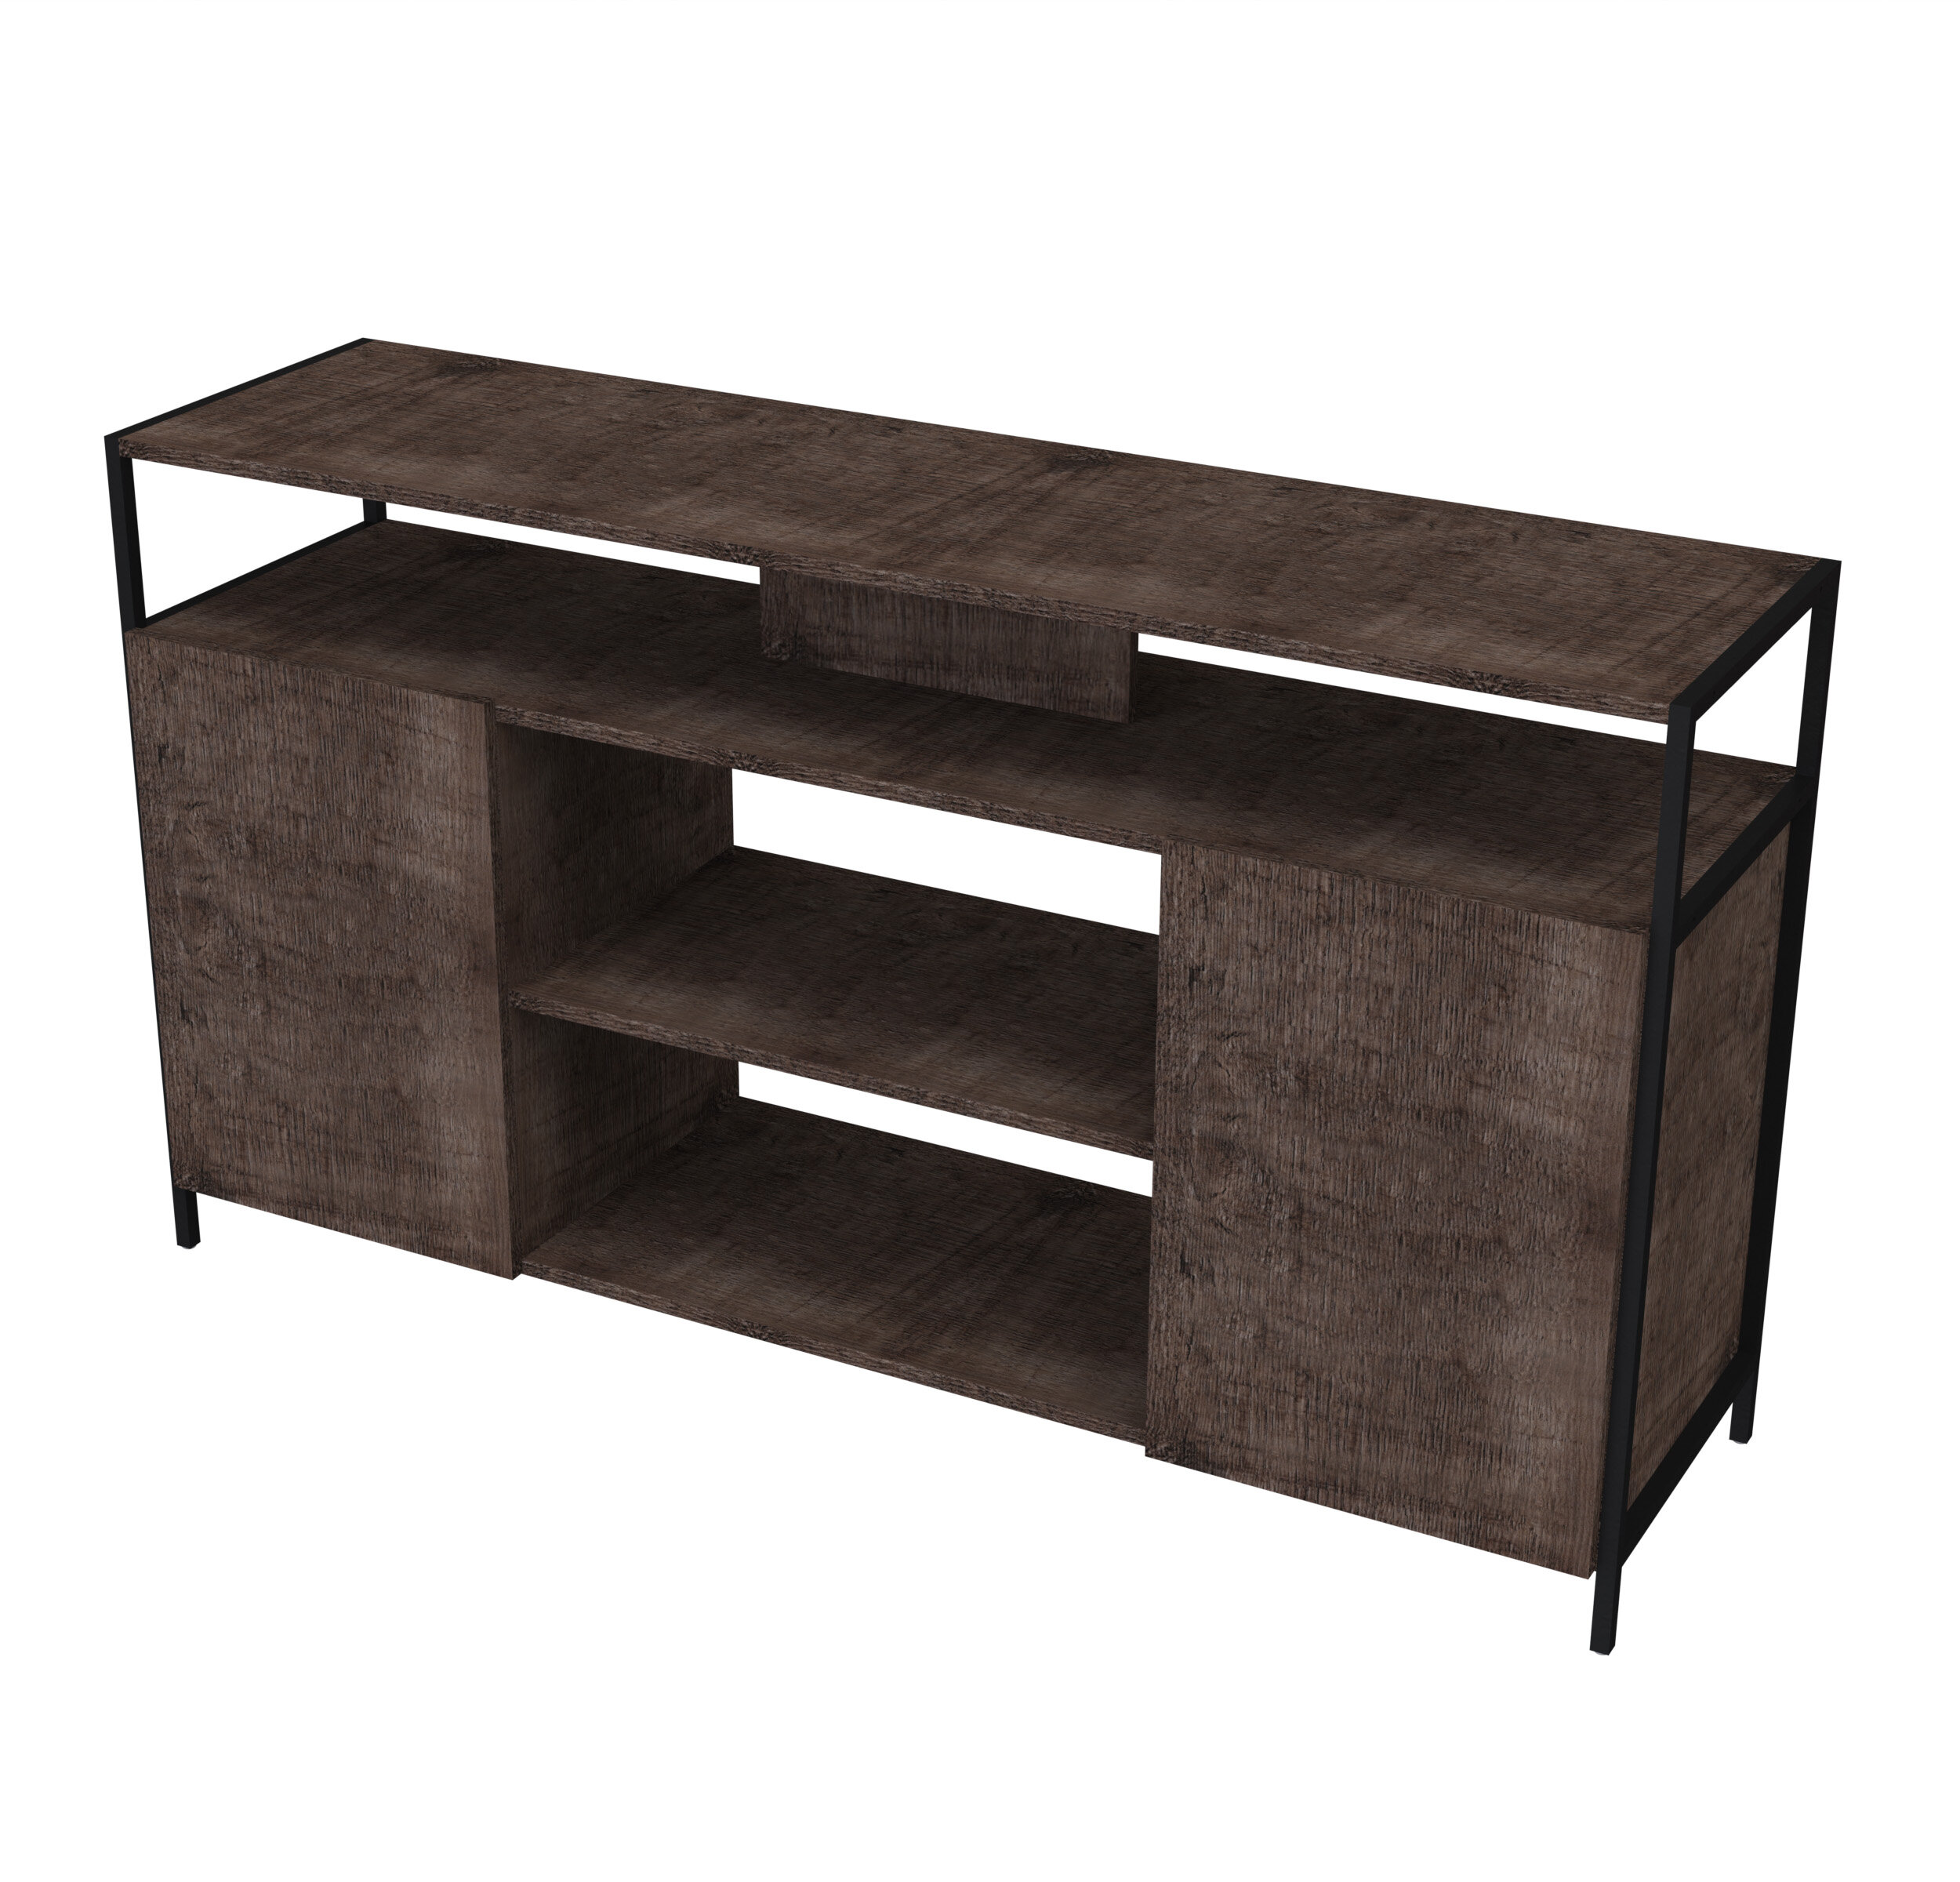 Modern Rustic Interiors Hudson Tv Stand For Tvs Up To 60 Wayfair